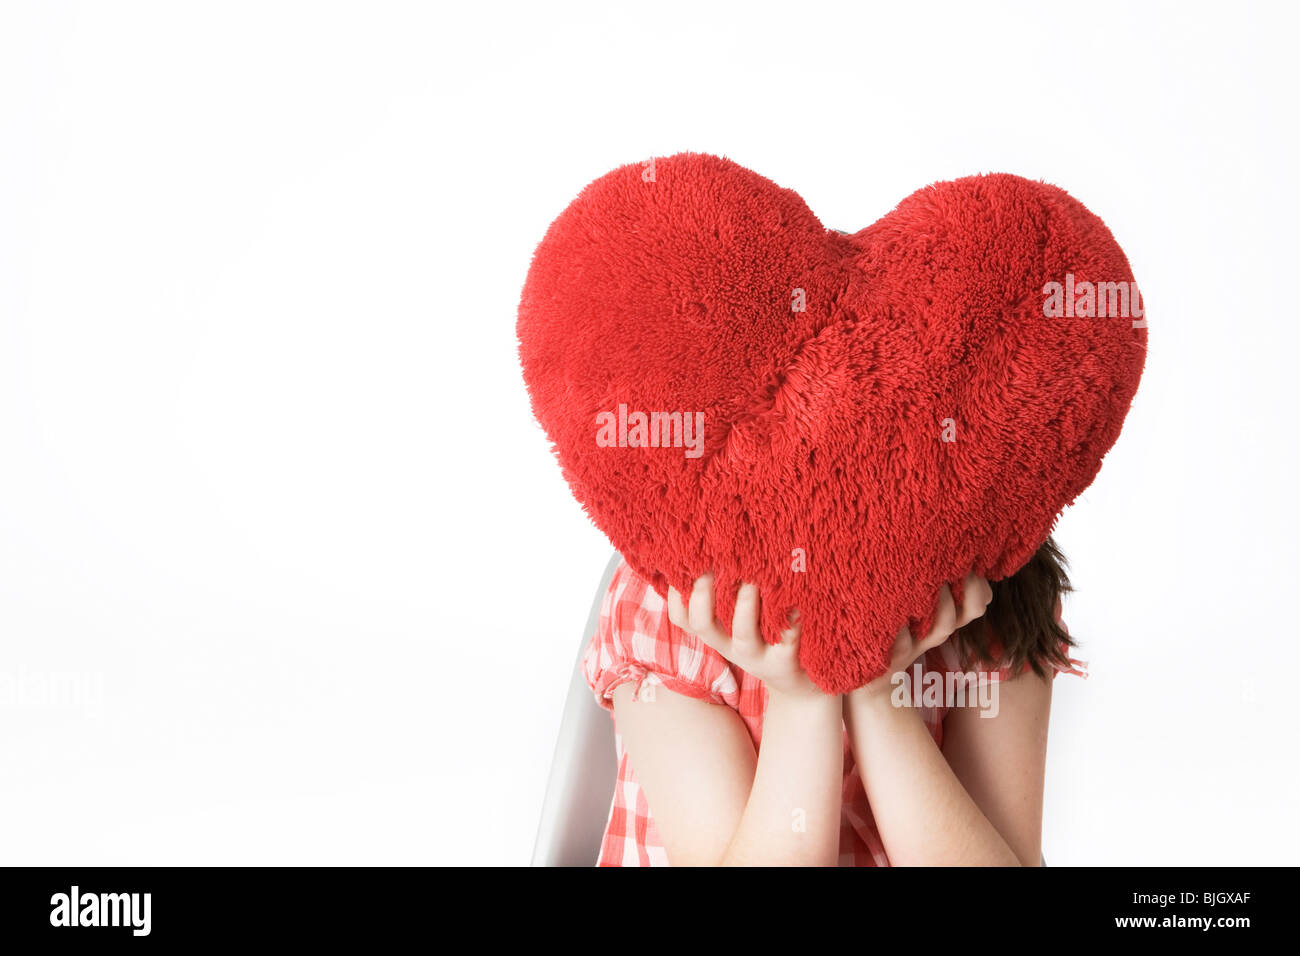 57,714 Cojin Corazon Royalty-Free Photos and Stock Images